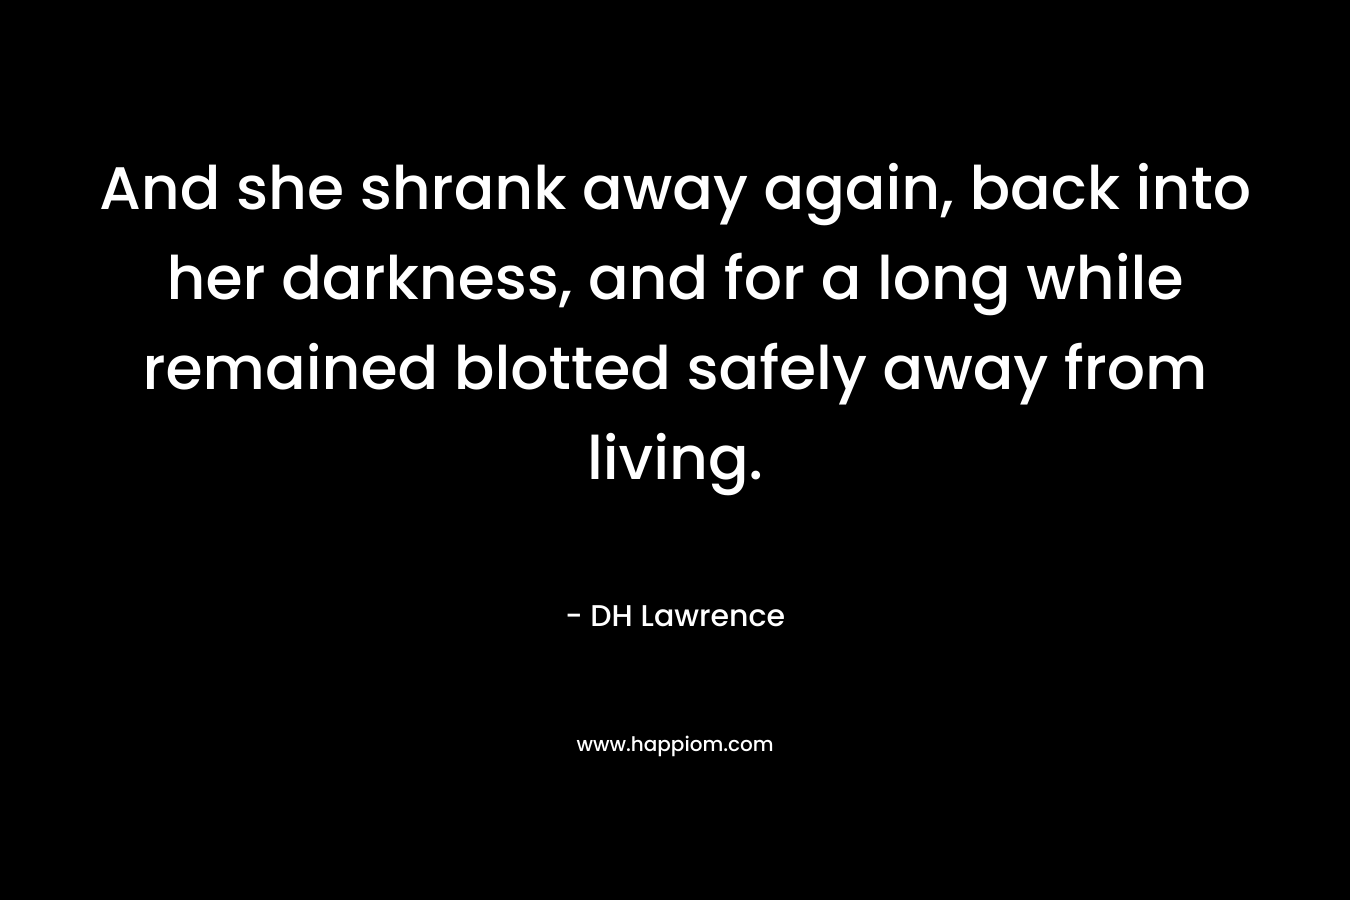 And she shrank away again, back into her darkness, and for a long while remained blotted safely away from living.